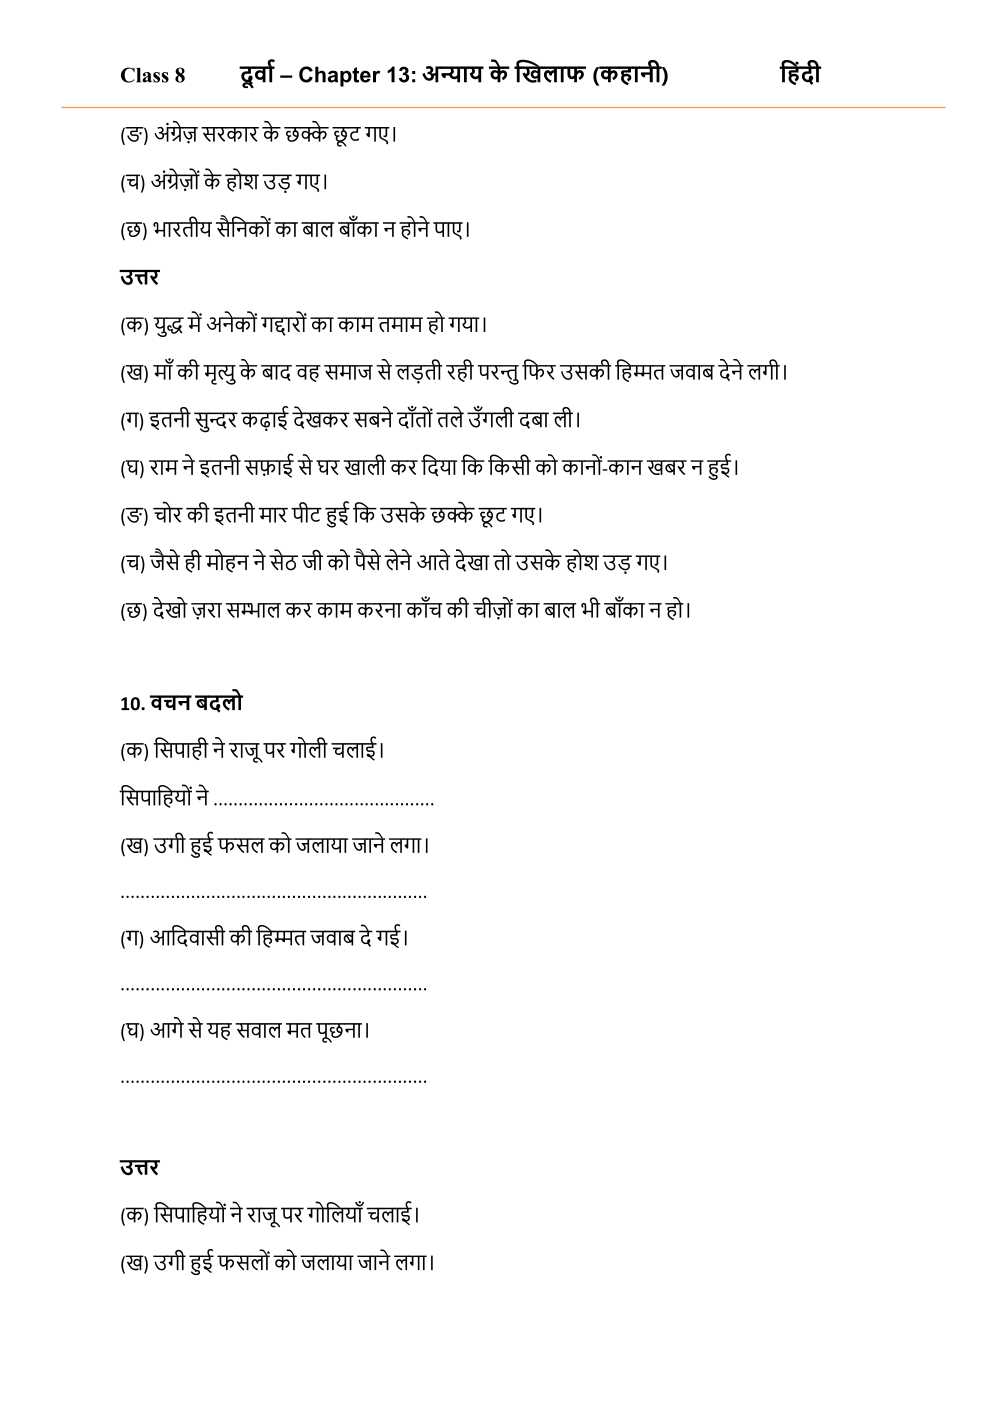 NCERT Solutions For Class 8 Hindi Durva Chapter 13